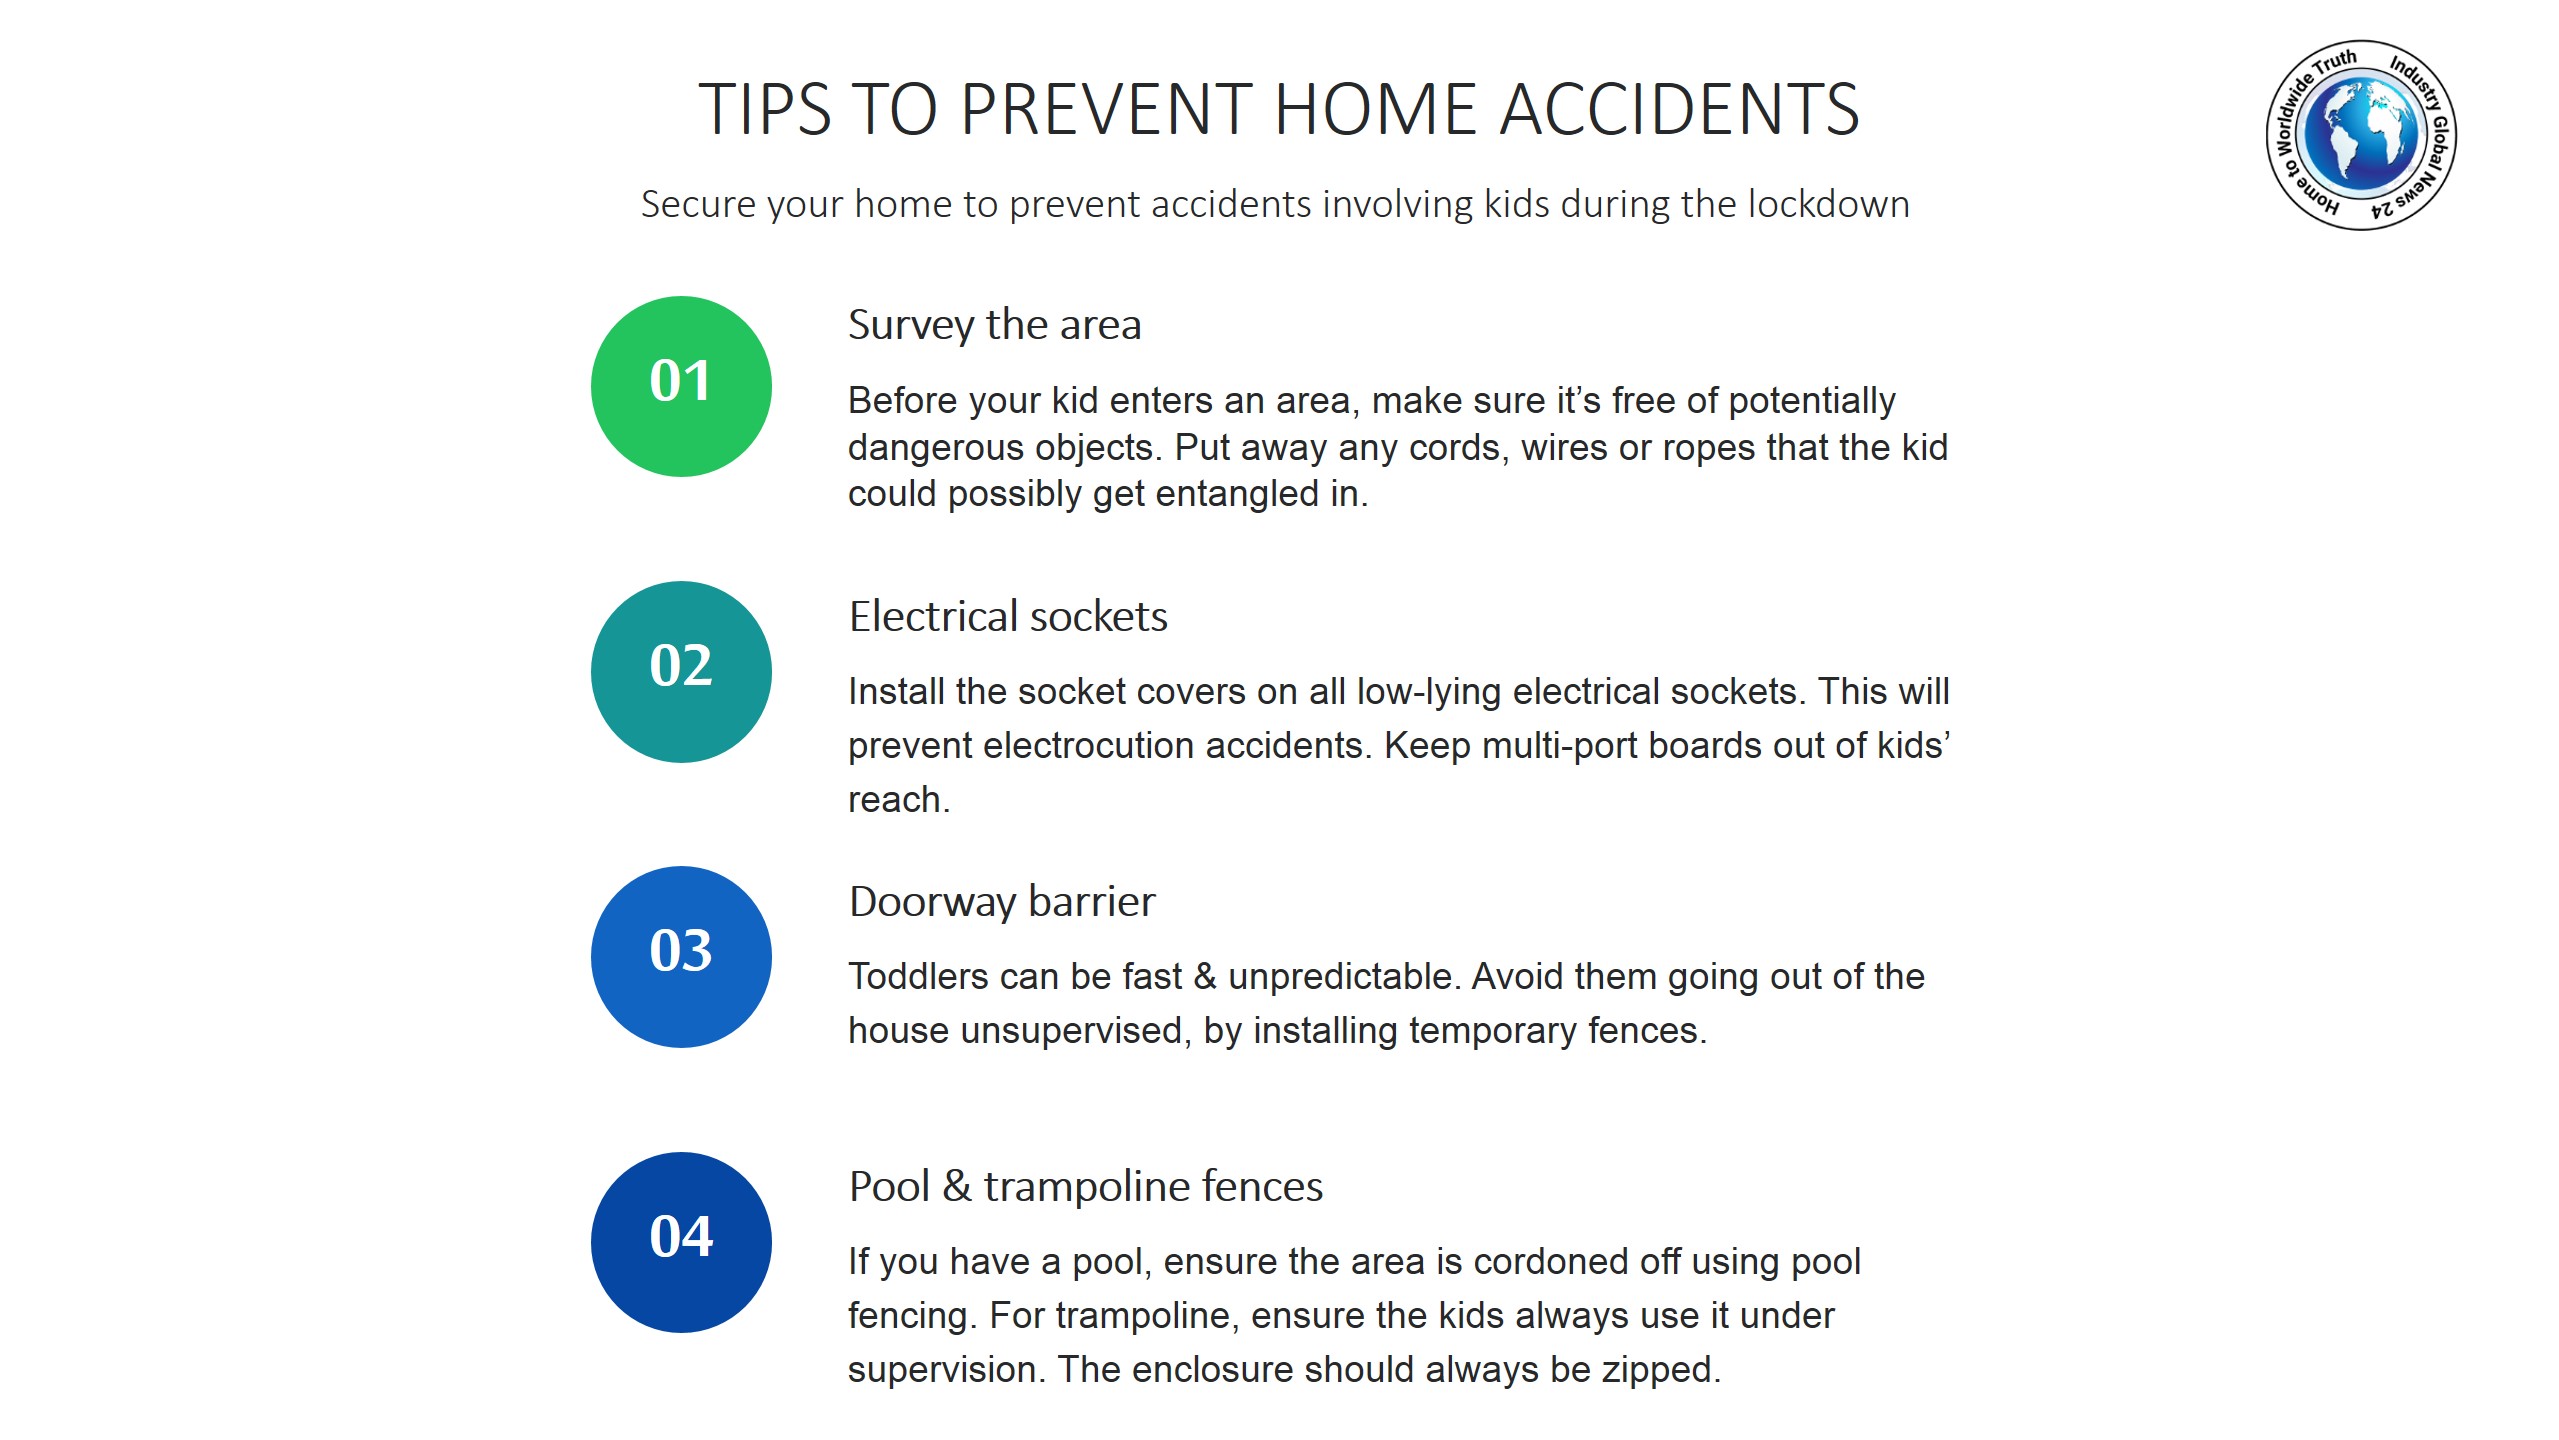 Tips to prevent home accidents